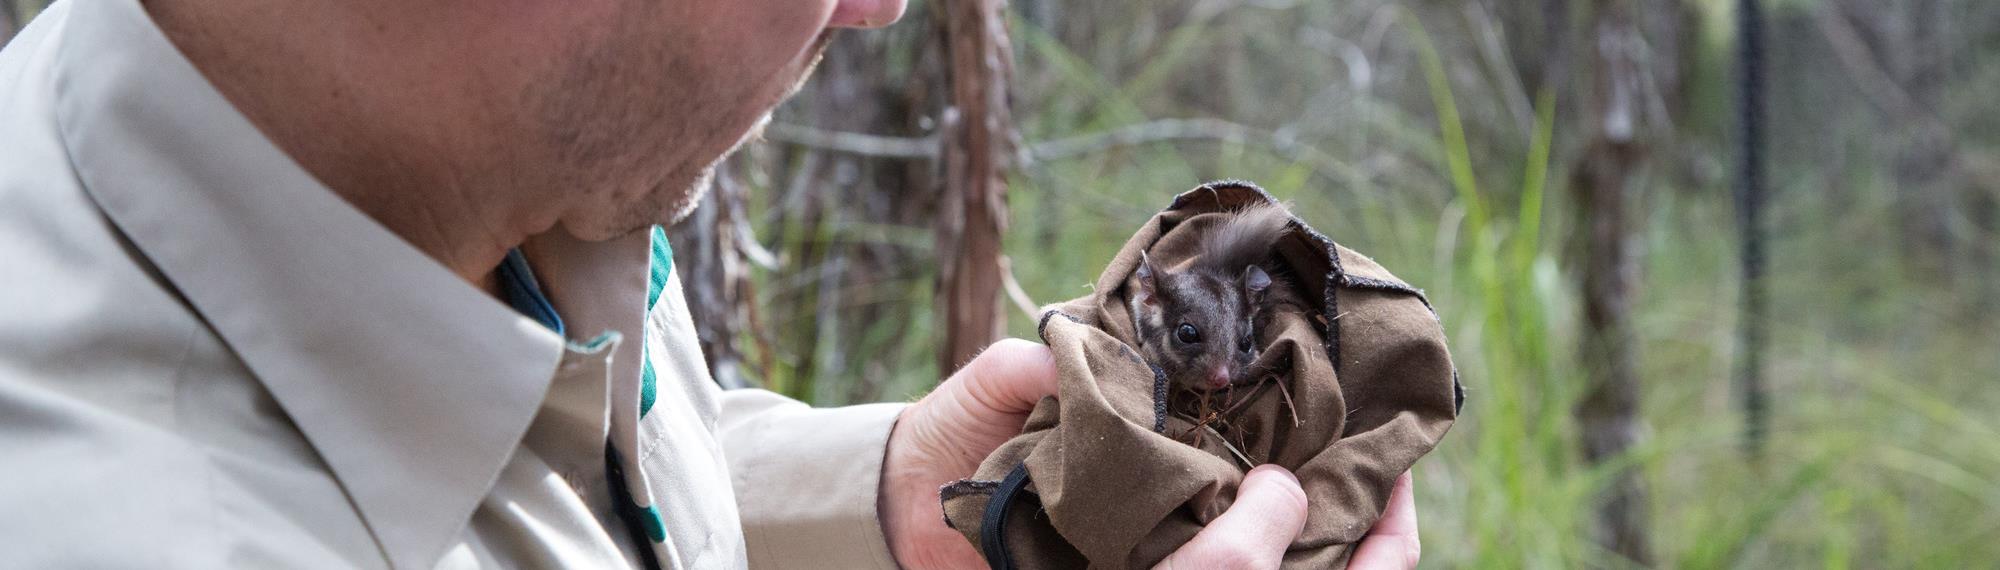 Man looking at a young Leadbeater's Possum in a sack.